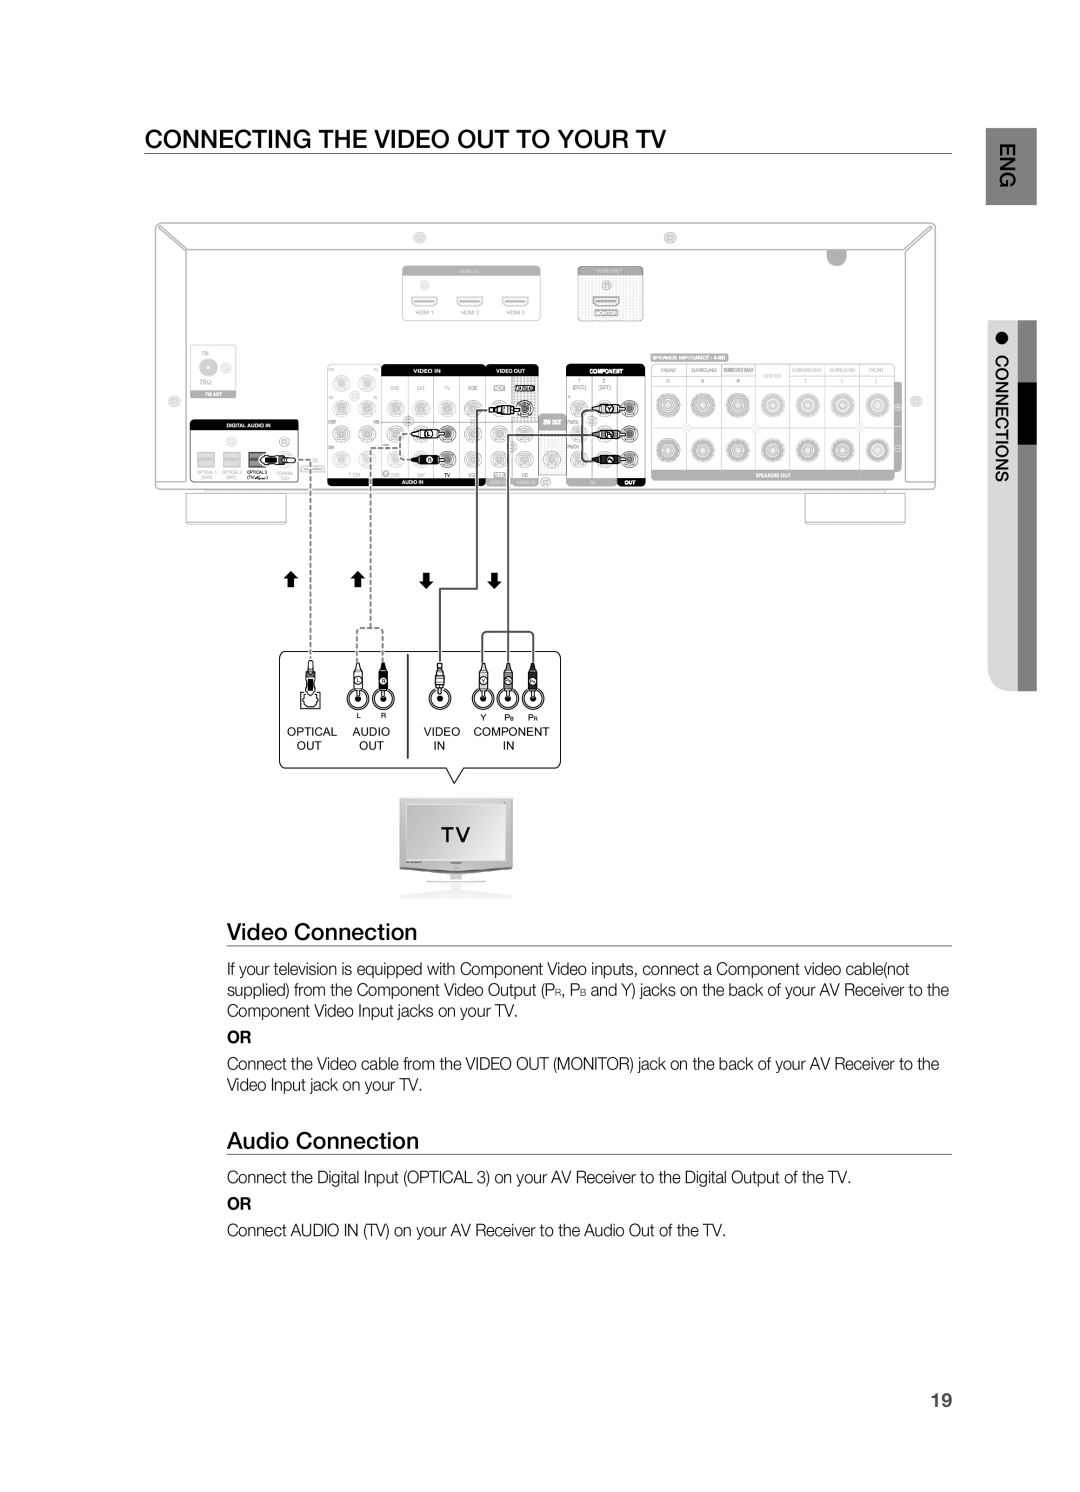 Samsung HT-AS730S user manual Connecting the Video Out to your TV, Video Connection, Audio Connection 